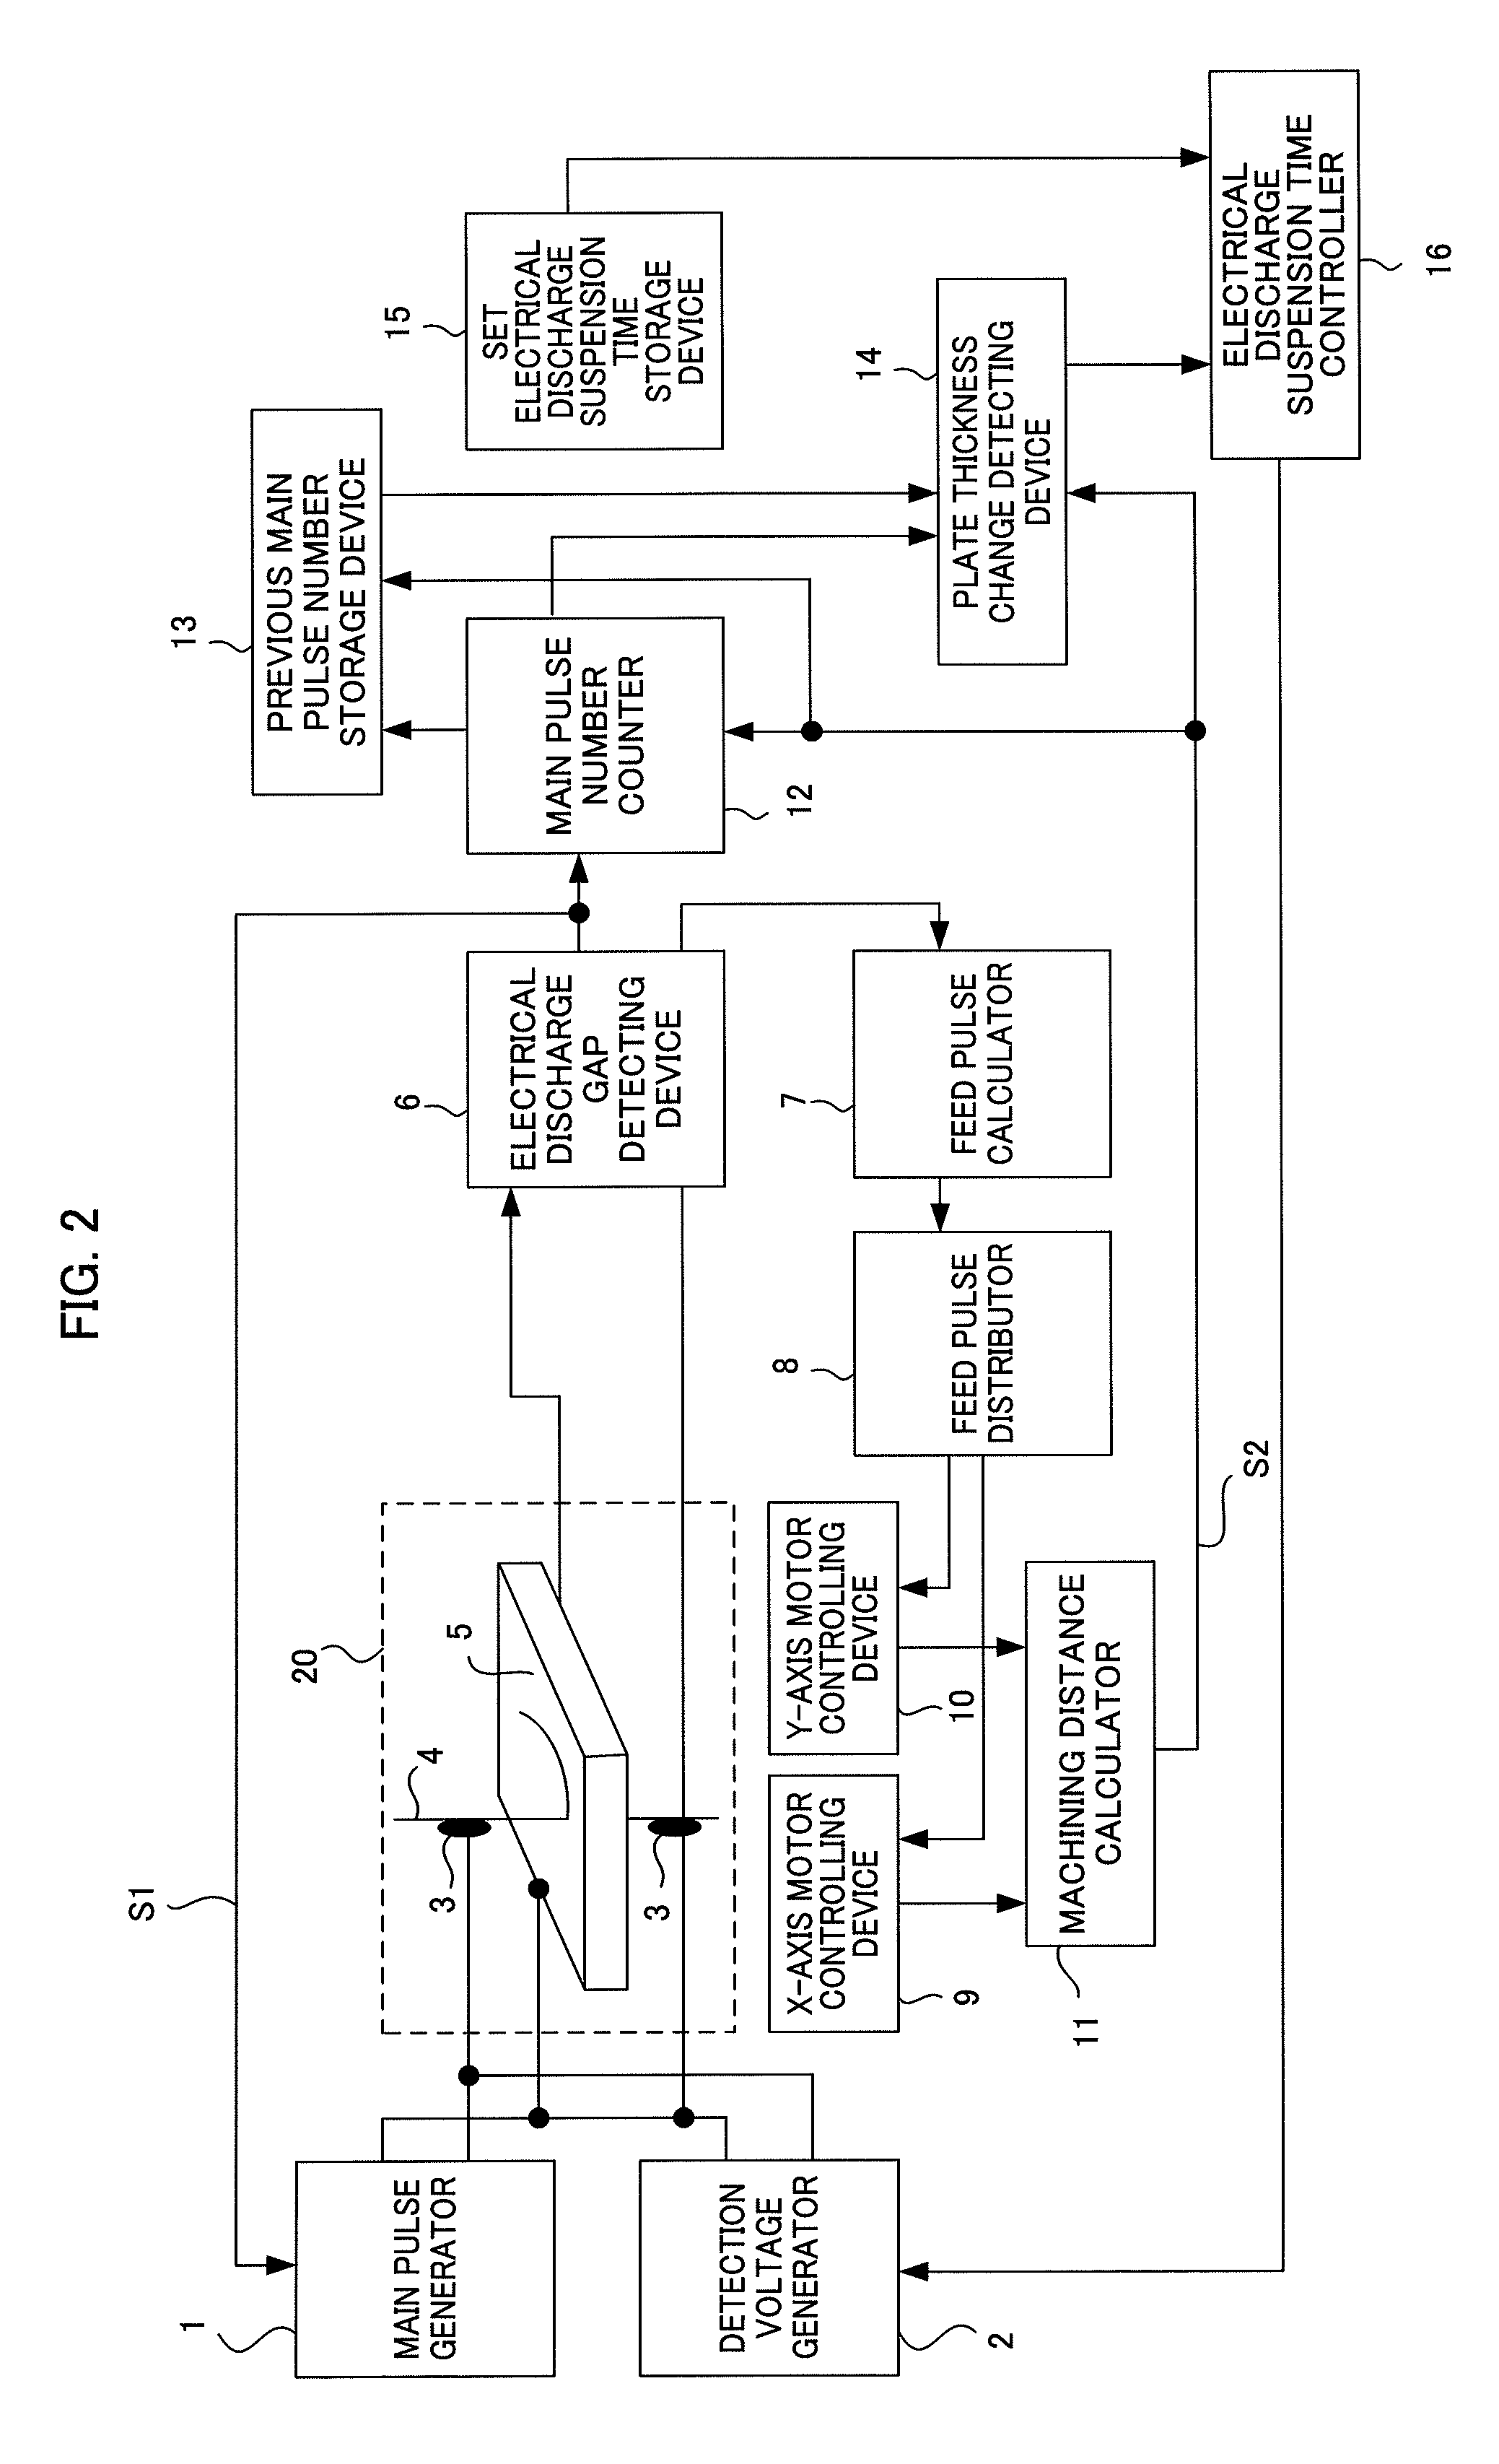 Wire electrical discharge machine carrying out electrical discharge machining by inclining wire electrode